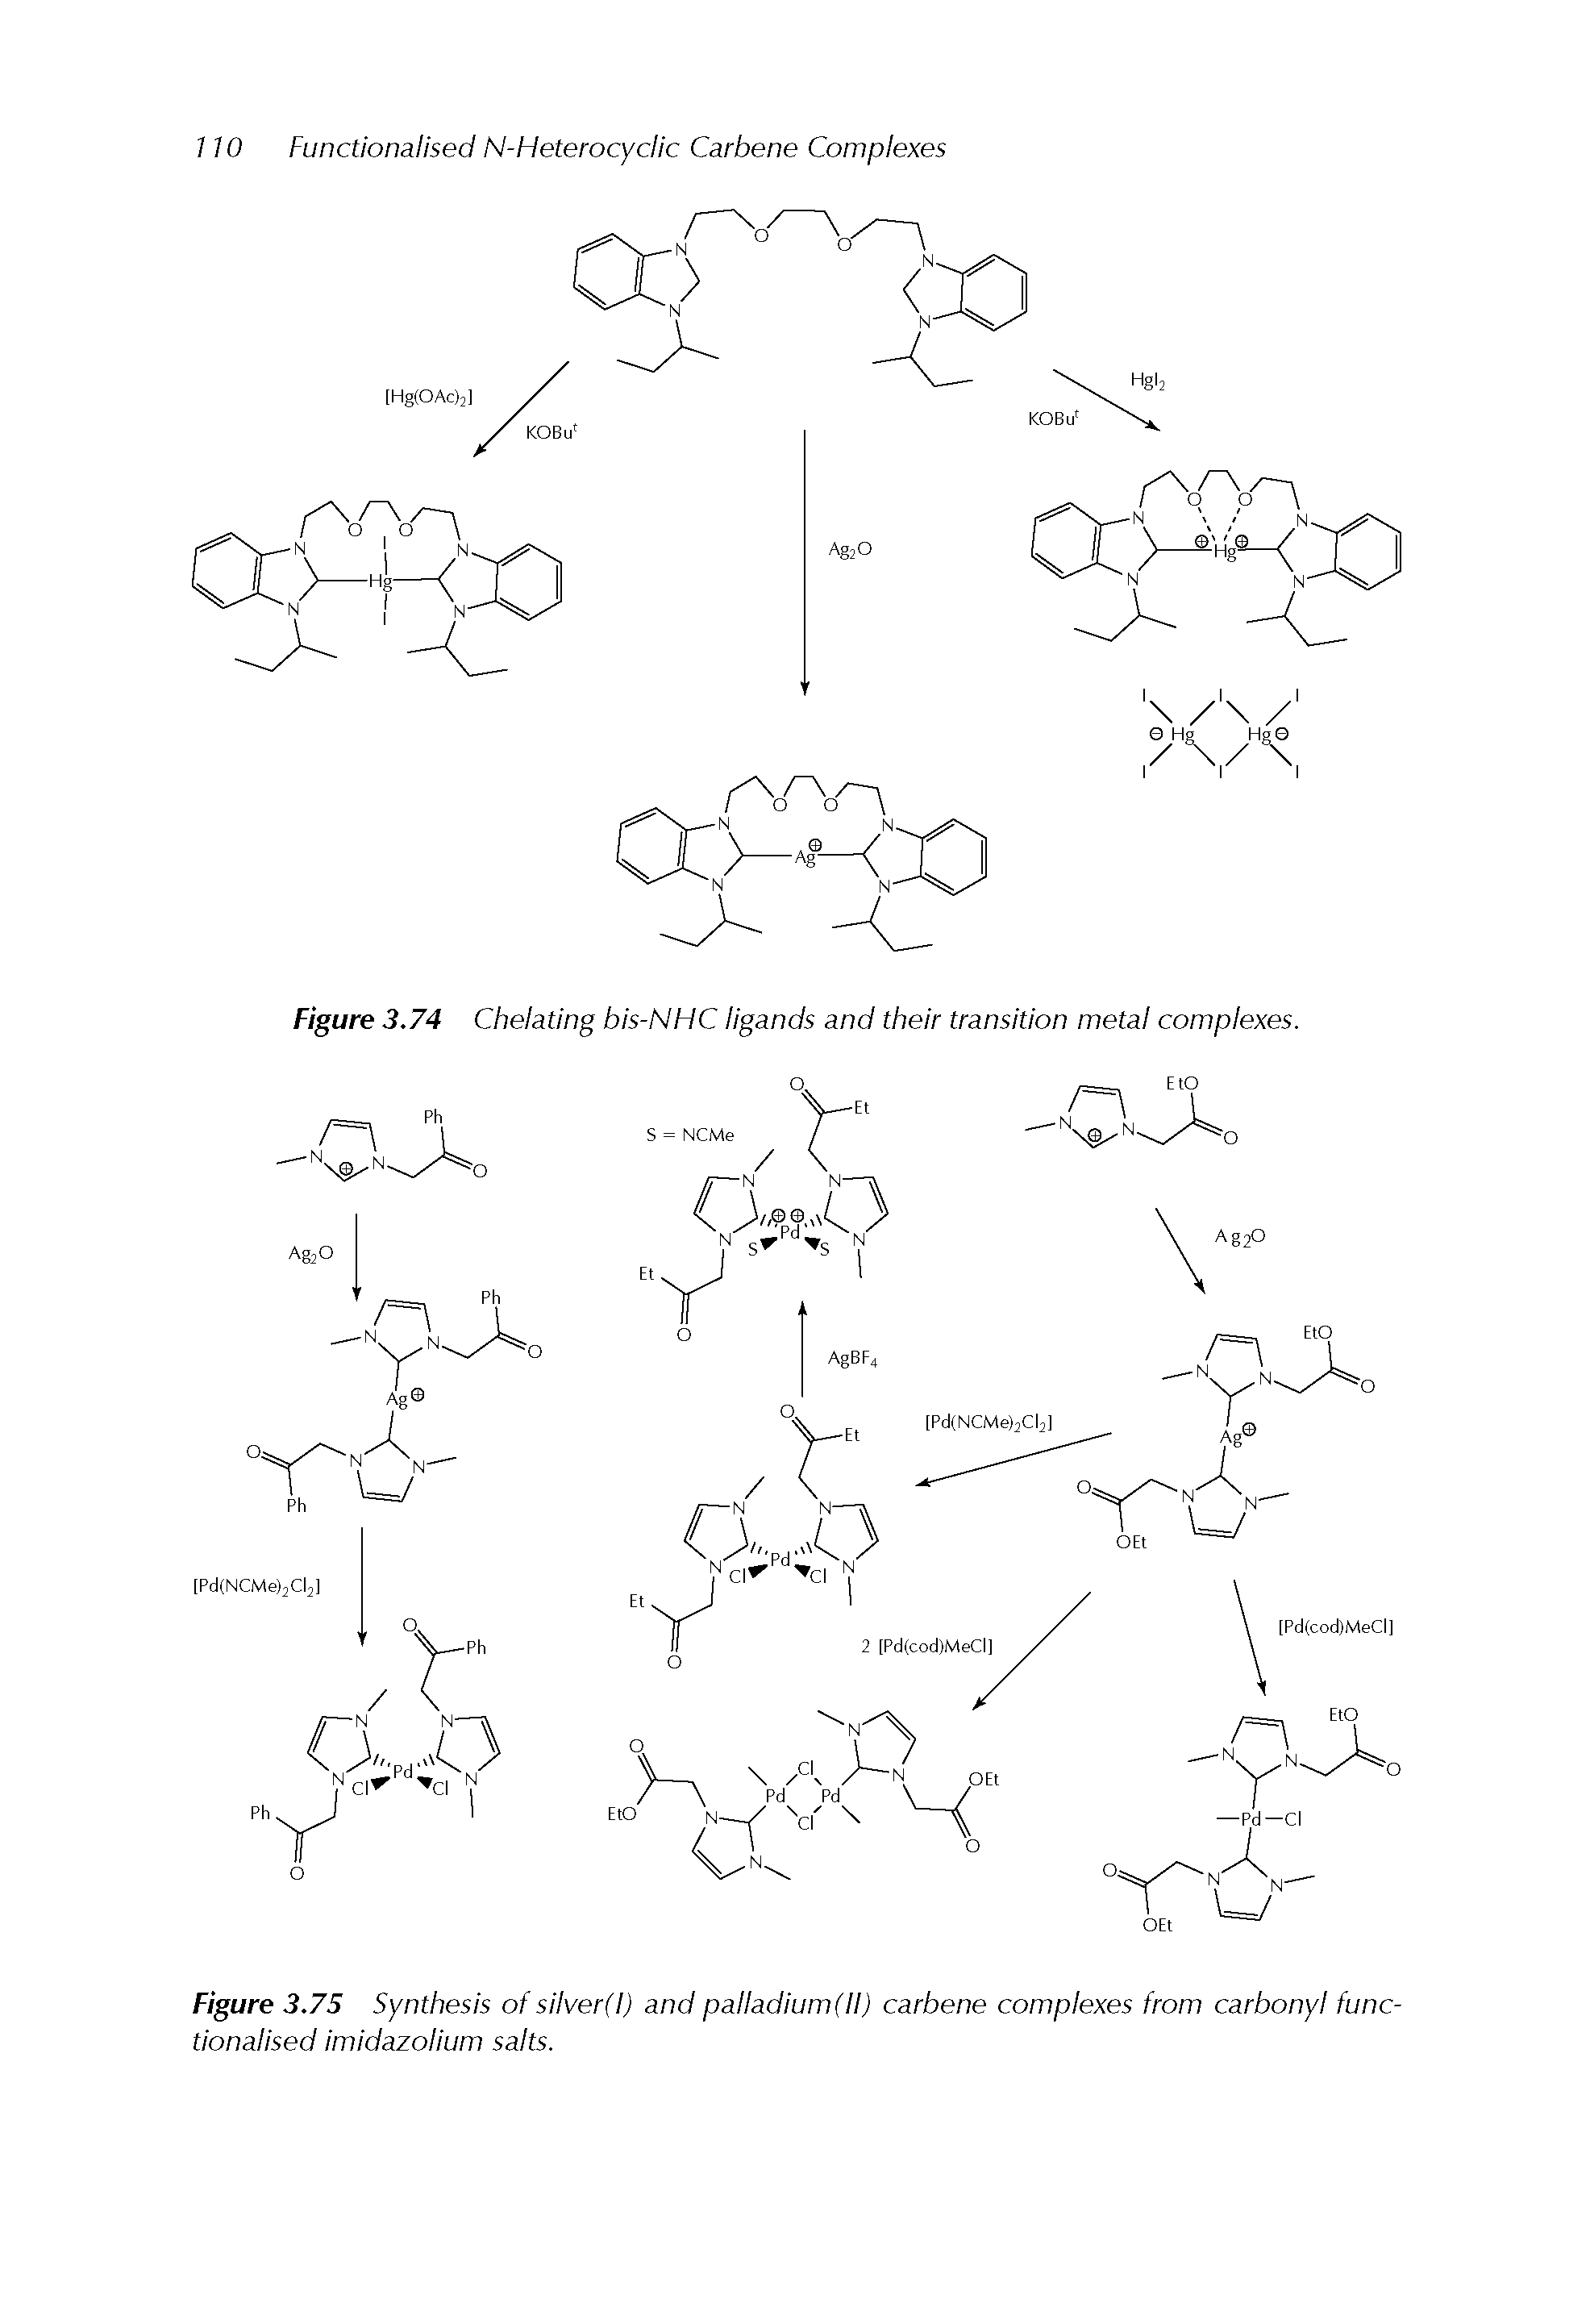 Figure 3,74 Chelating bis-NHC ligands and their transition metal complexes.